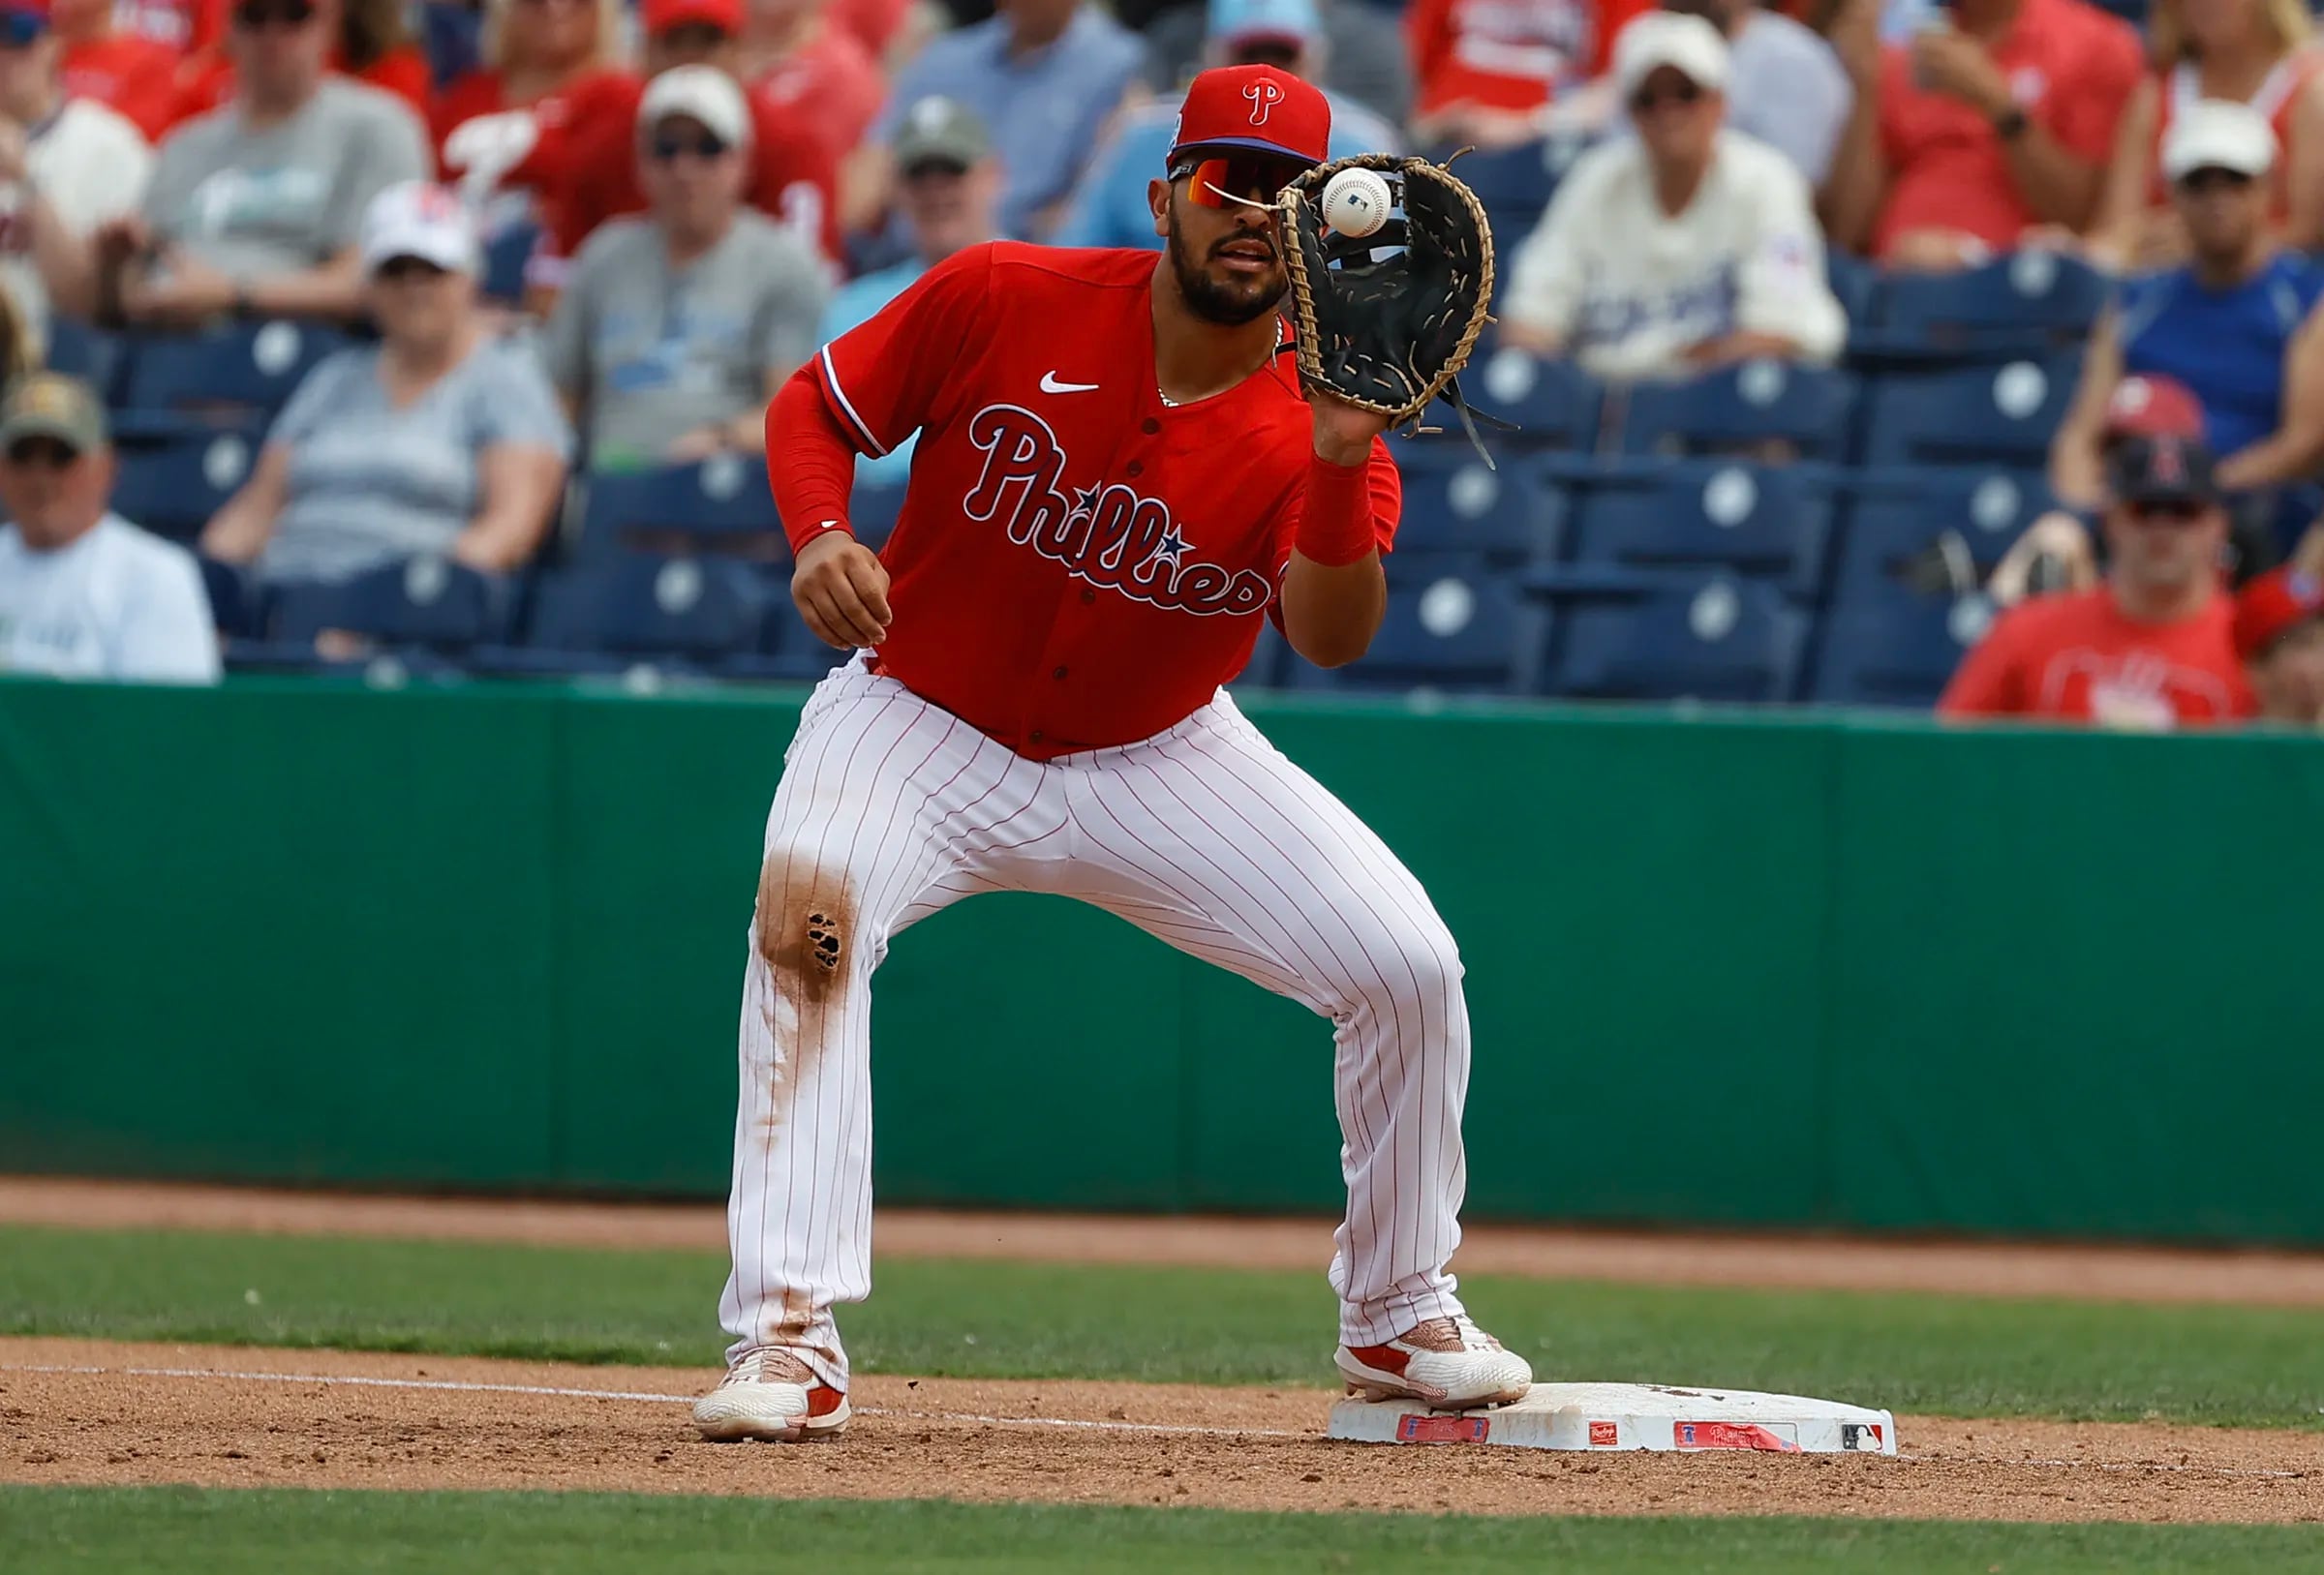 Phils' Hoskins tears knee, expected to miss significant time